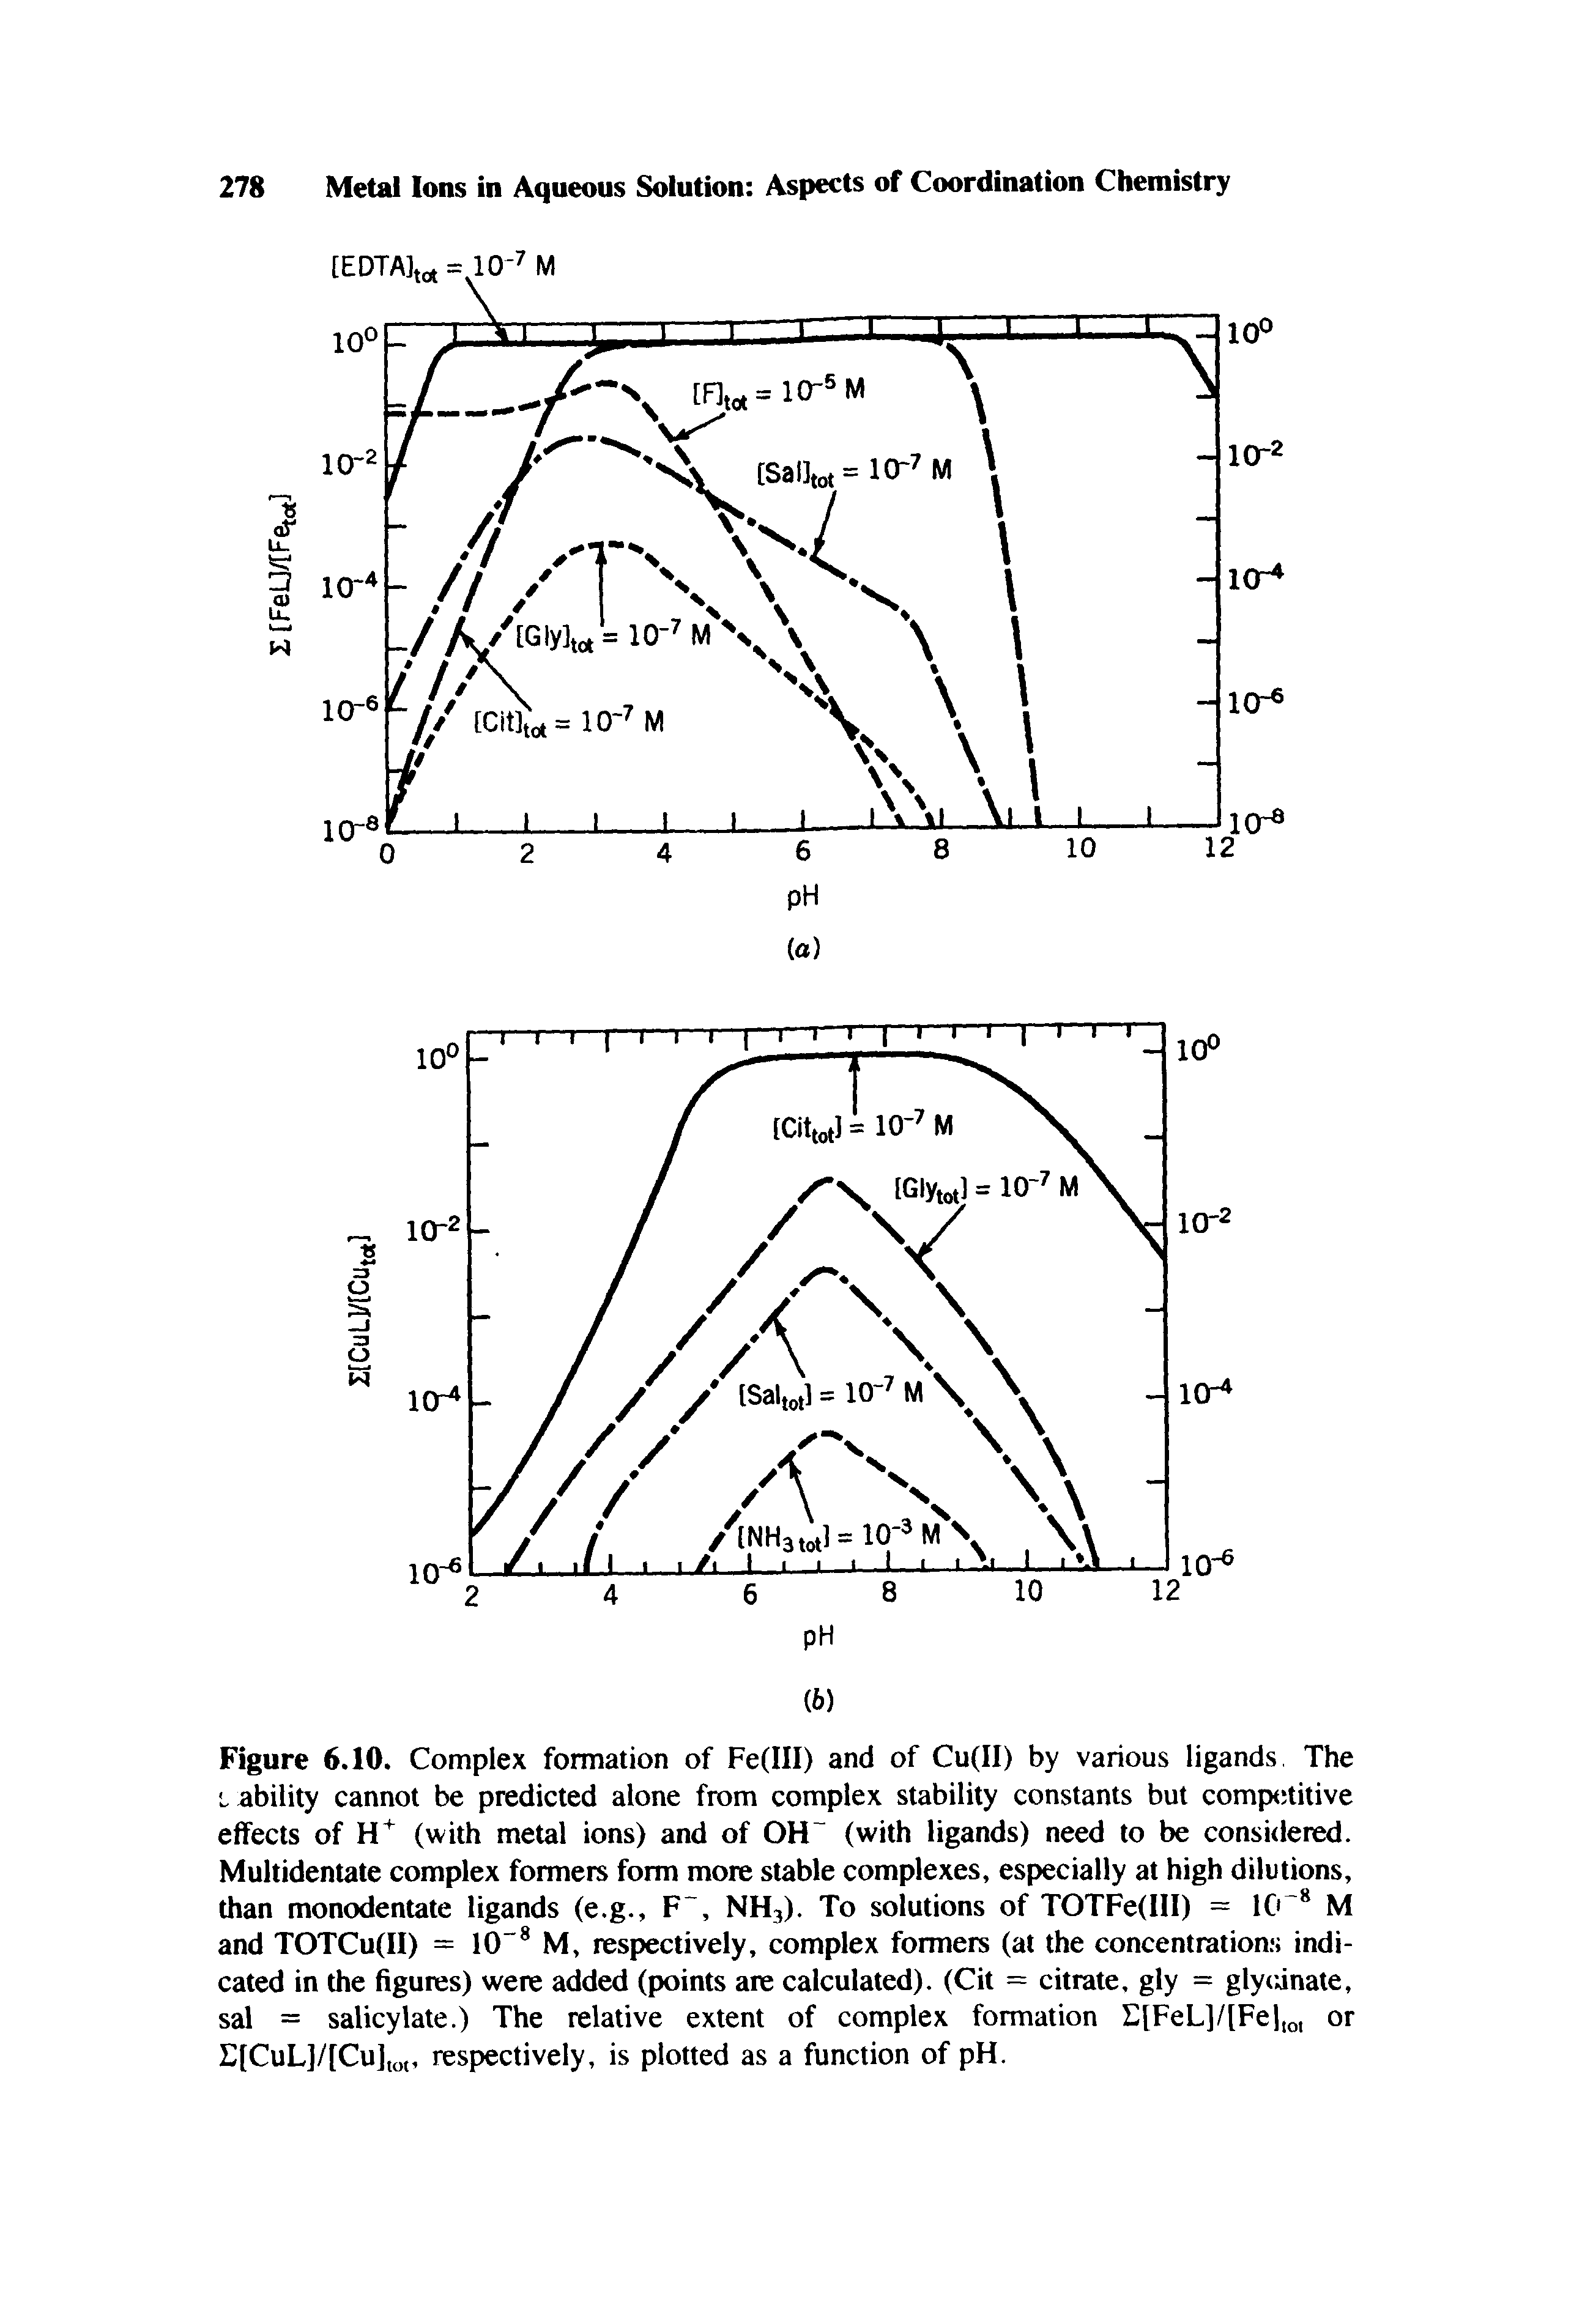 Figure 6.10. Complex formation of Fe(III) and of Cu(II) by various ligands The Lability cannot be predicted alone from complex stability constants but competitive effects of (with metal ions) and of OH (with ligands) need to be considered. Multidentate complex formers form more stable complexes, especially at high dilutions, than monodentate ligands (e.g., F, NH3). To solutions of TOTFe(III) = 10 M and TOTCu(II) = 10 M, respectively, complex formers (at the concentrations indicated in the figures) were added (points are calculated). (Cit = citrate, gly = gly<anate, sal = salicylate.) The relative extent of complex formation E[FeL]/[Fel,o, or E(CuL]/[Cu]t , respectively, is plotted as a function of pH.